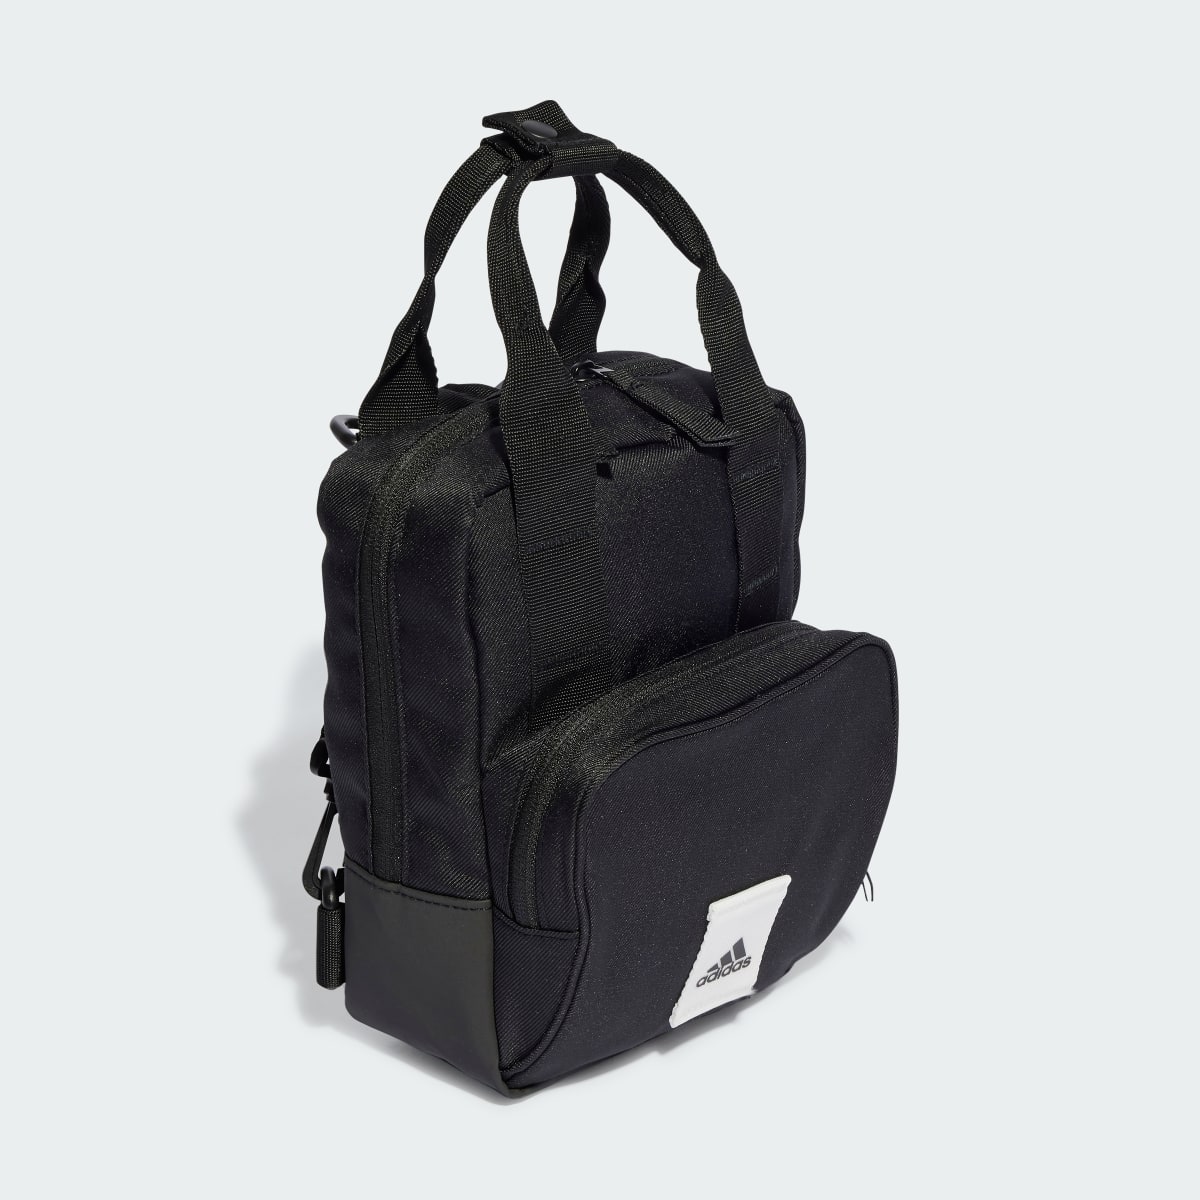 Adidas Prime Backpack Extra Small. 4